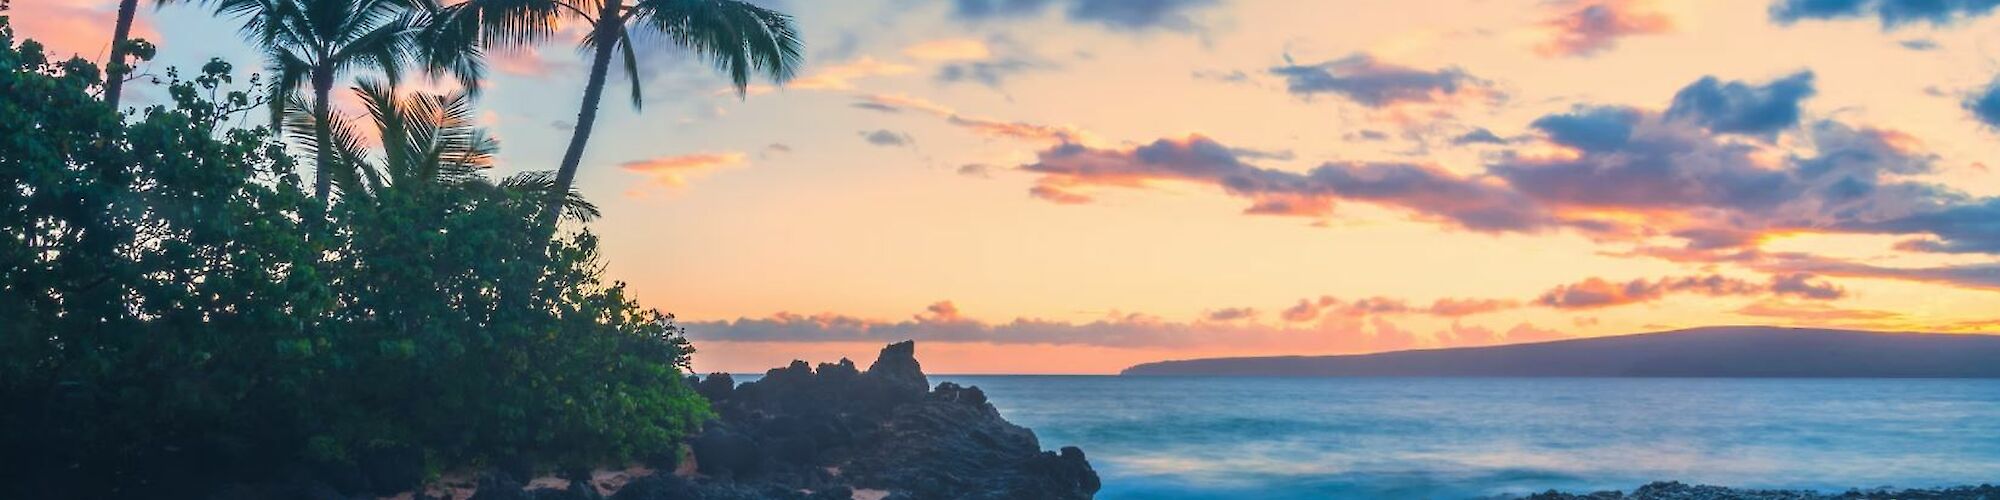 A serene tropical beach at sunset with palm trees, rocky shoreline, and calm ocean waves under a colorful sky.